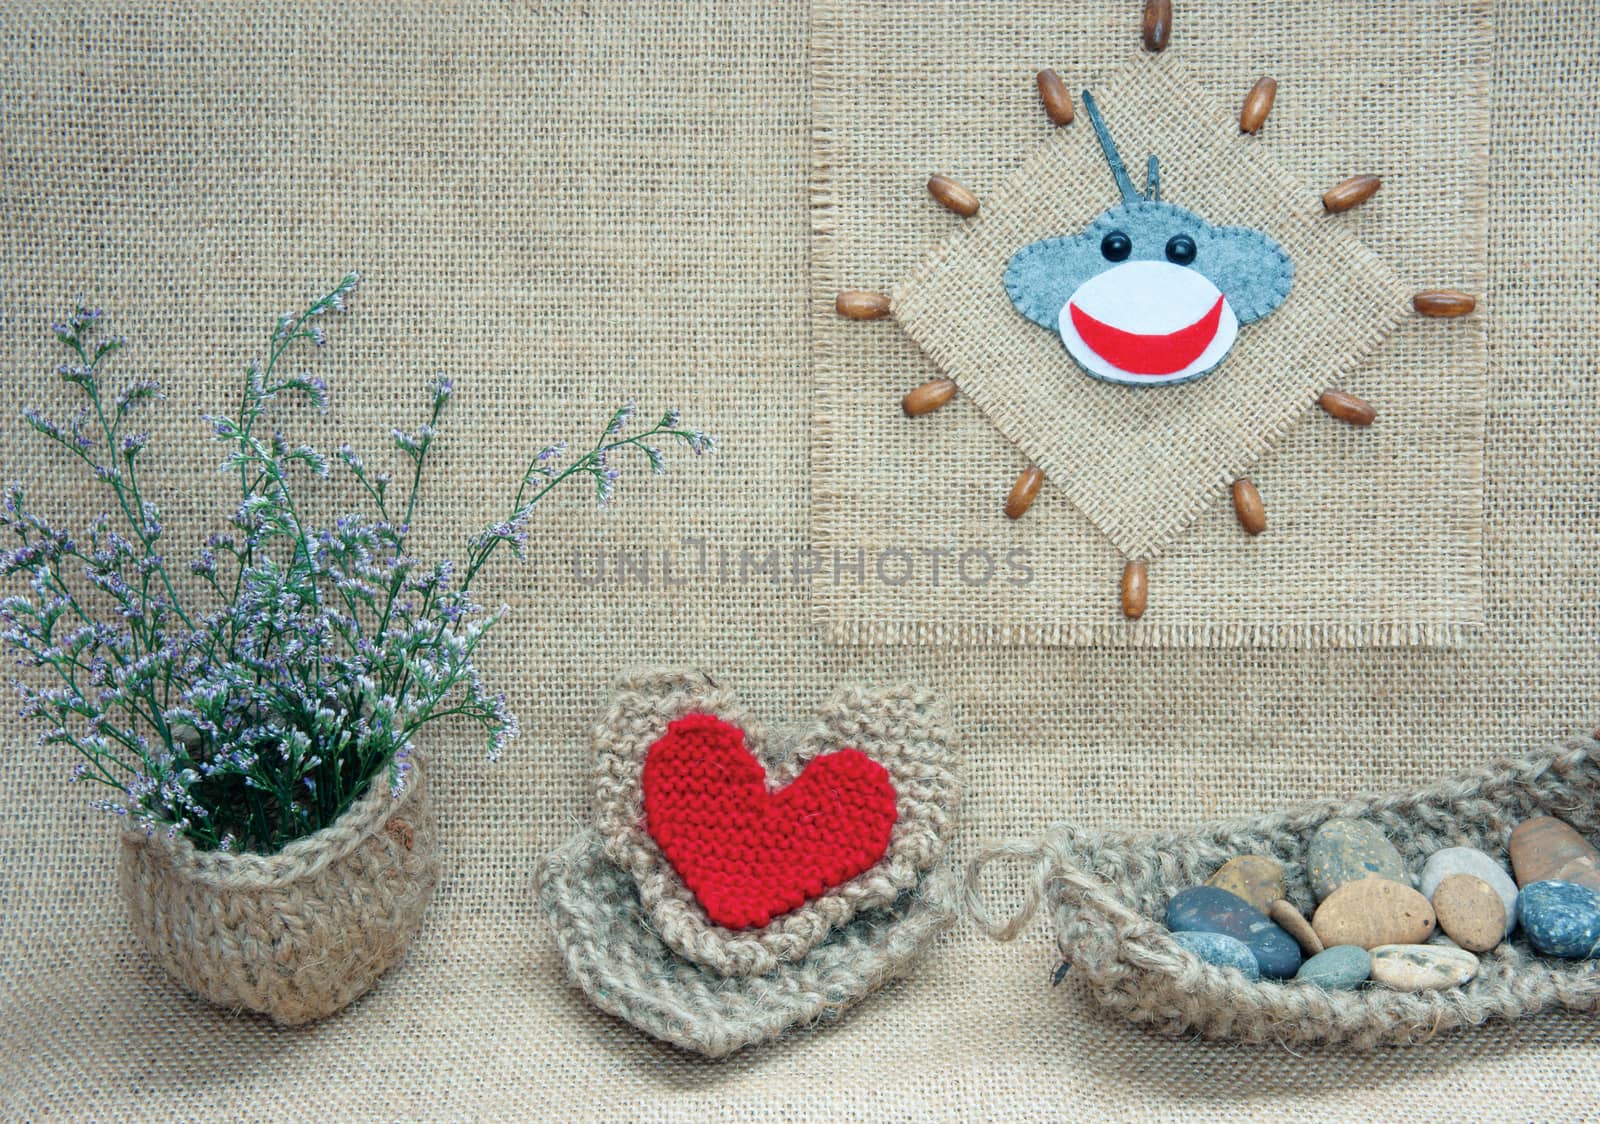 Art idea with funny monkey for happy new year 2016, new year eve time, handmade monkey face, clockwise on hand made clock, heart, flower decor on burlap background, vintage concept